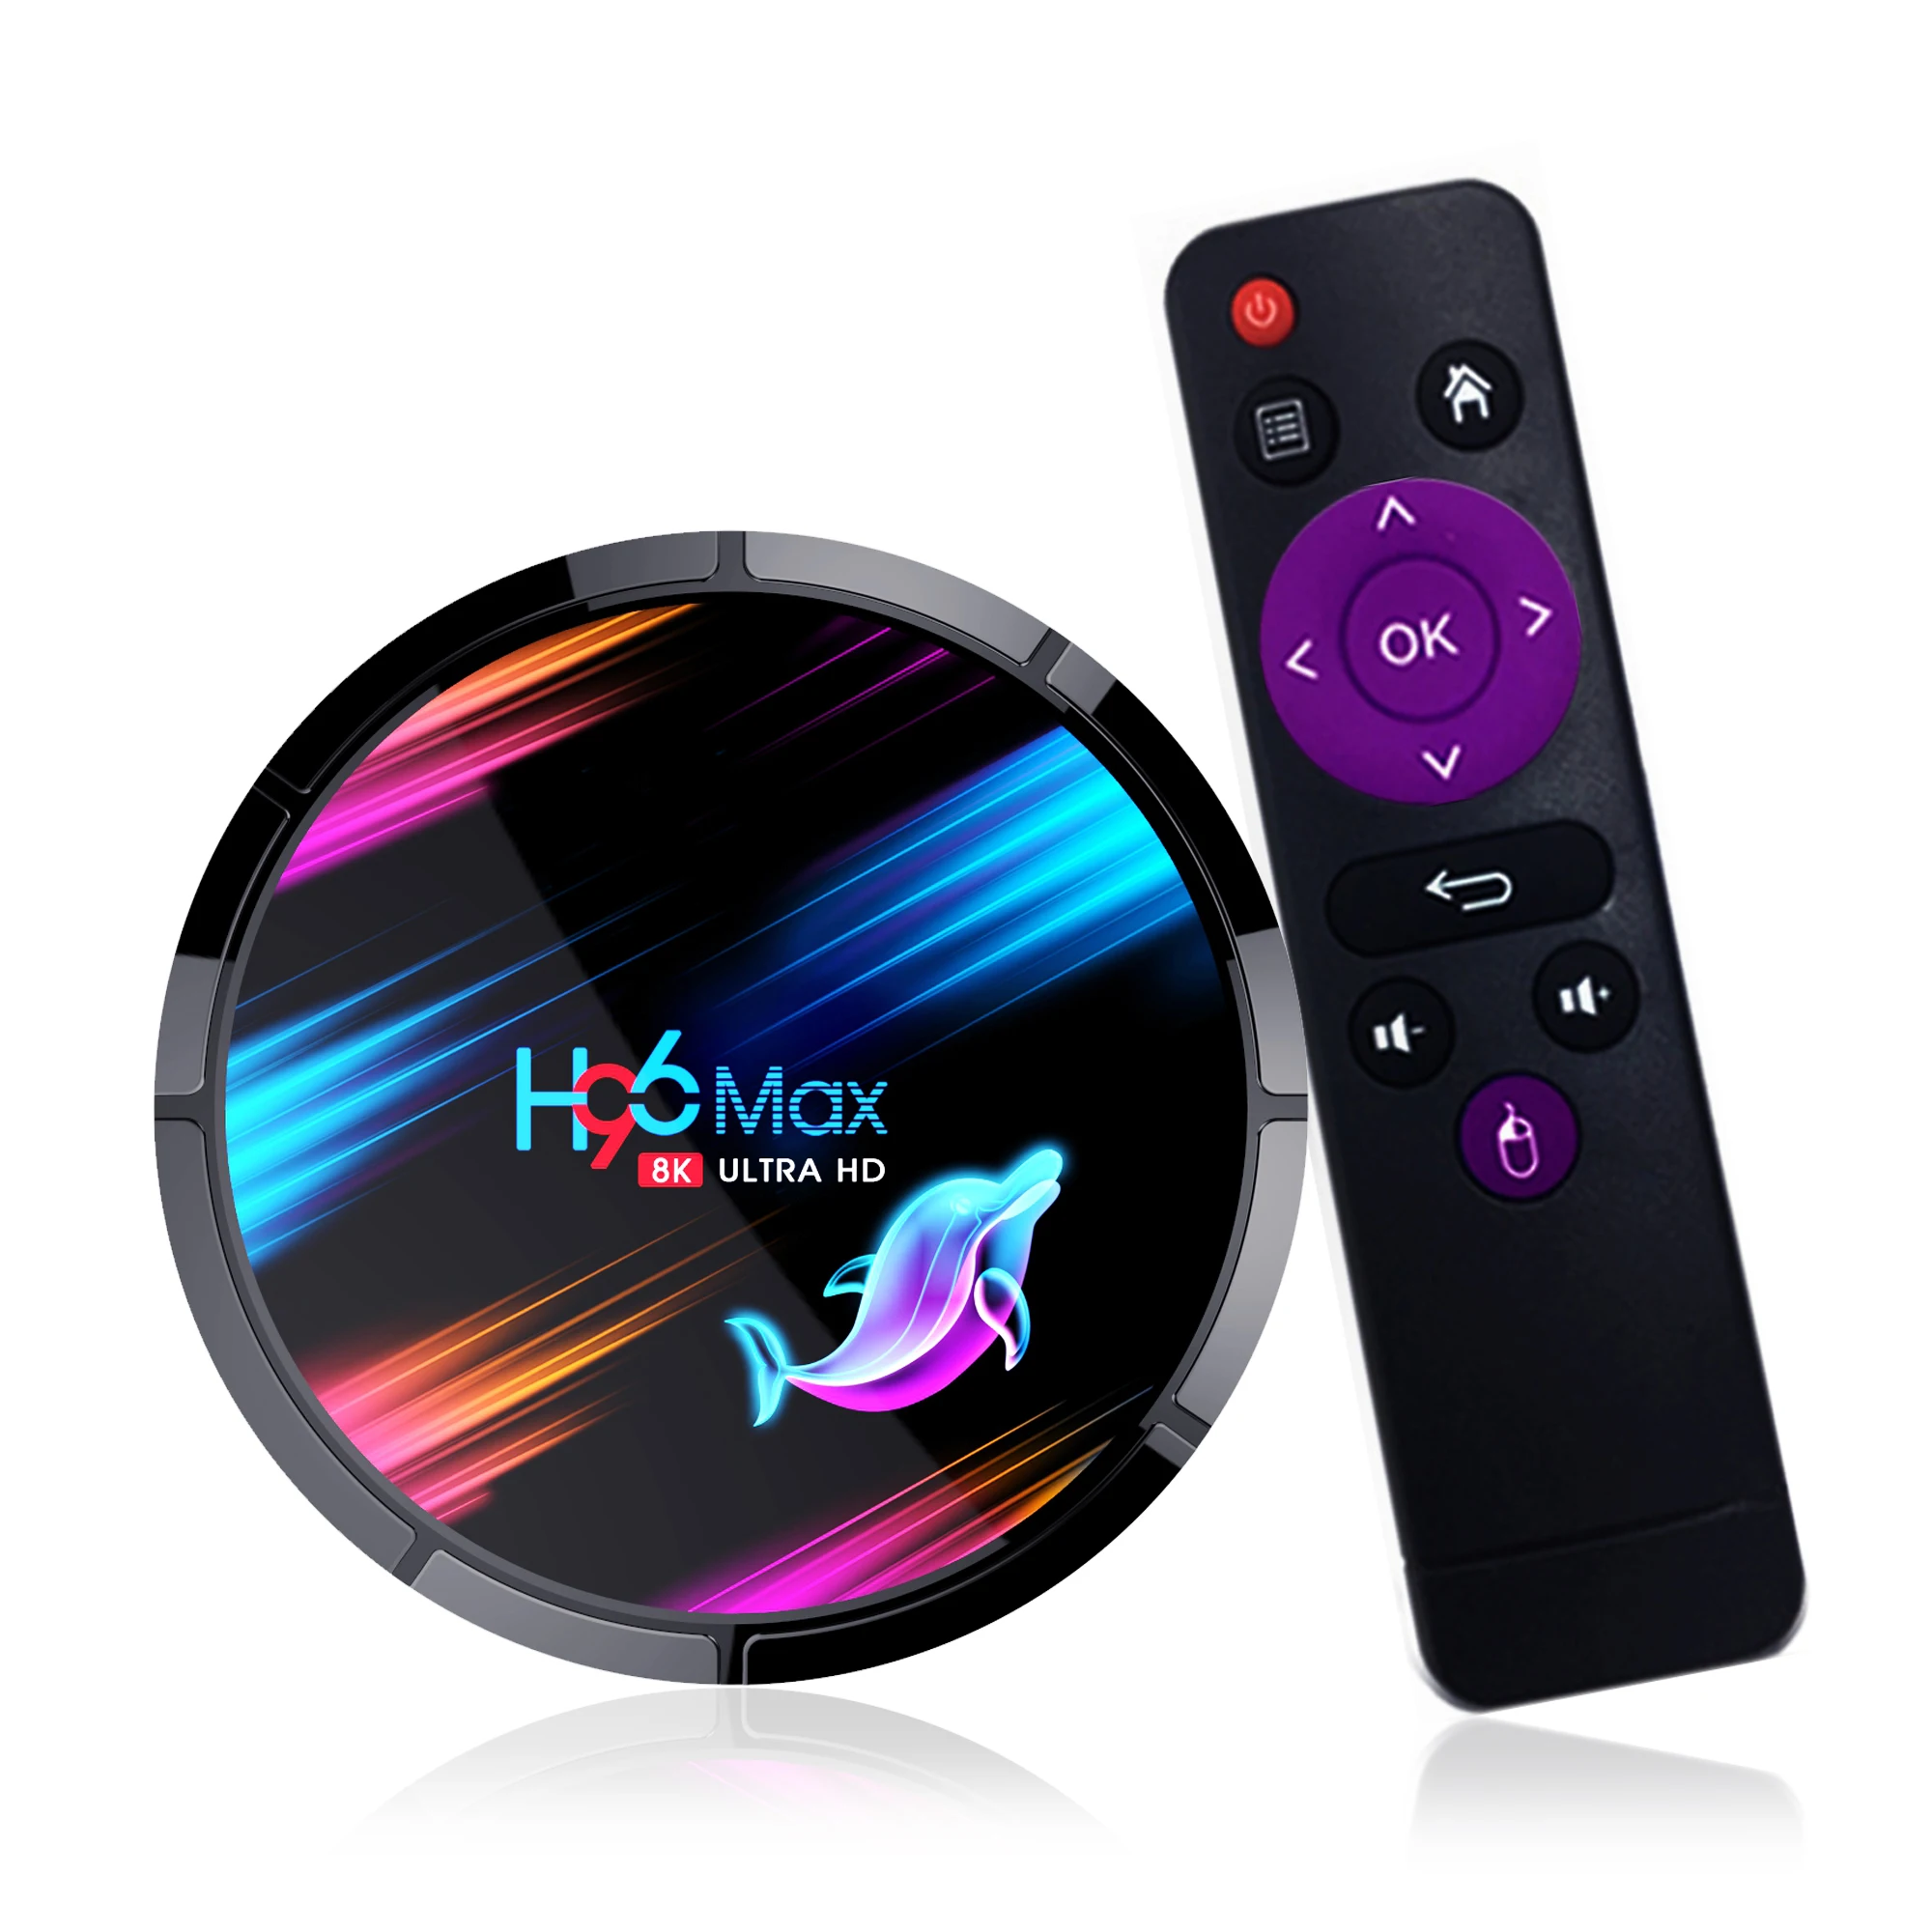 

2020 Factory Latest Android 9.0 tv box H96 MAX X3 Amlogic S905X3 chipset 8K Dual Band Wifi Smart Android Tv box 4GB+32GB